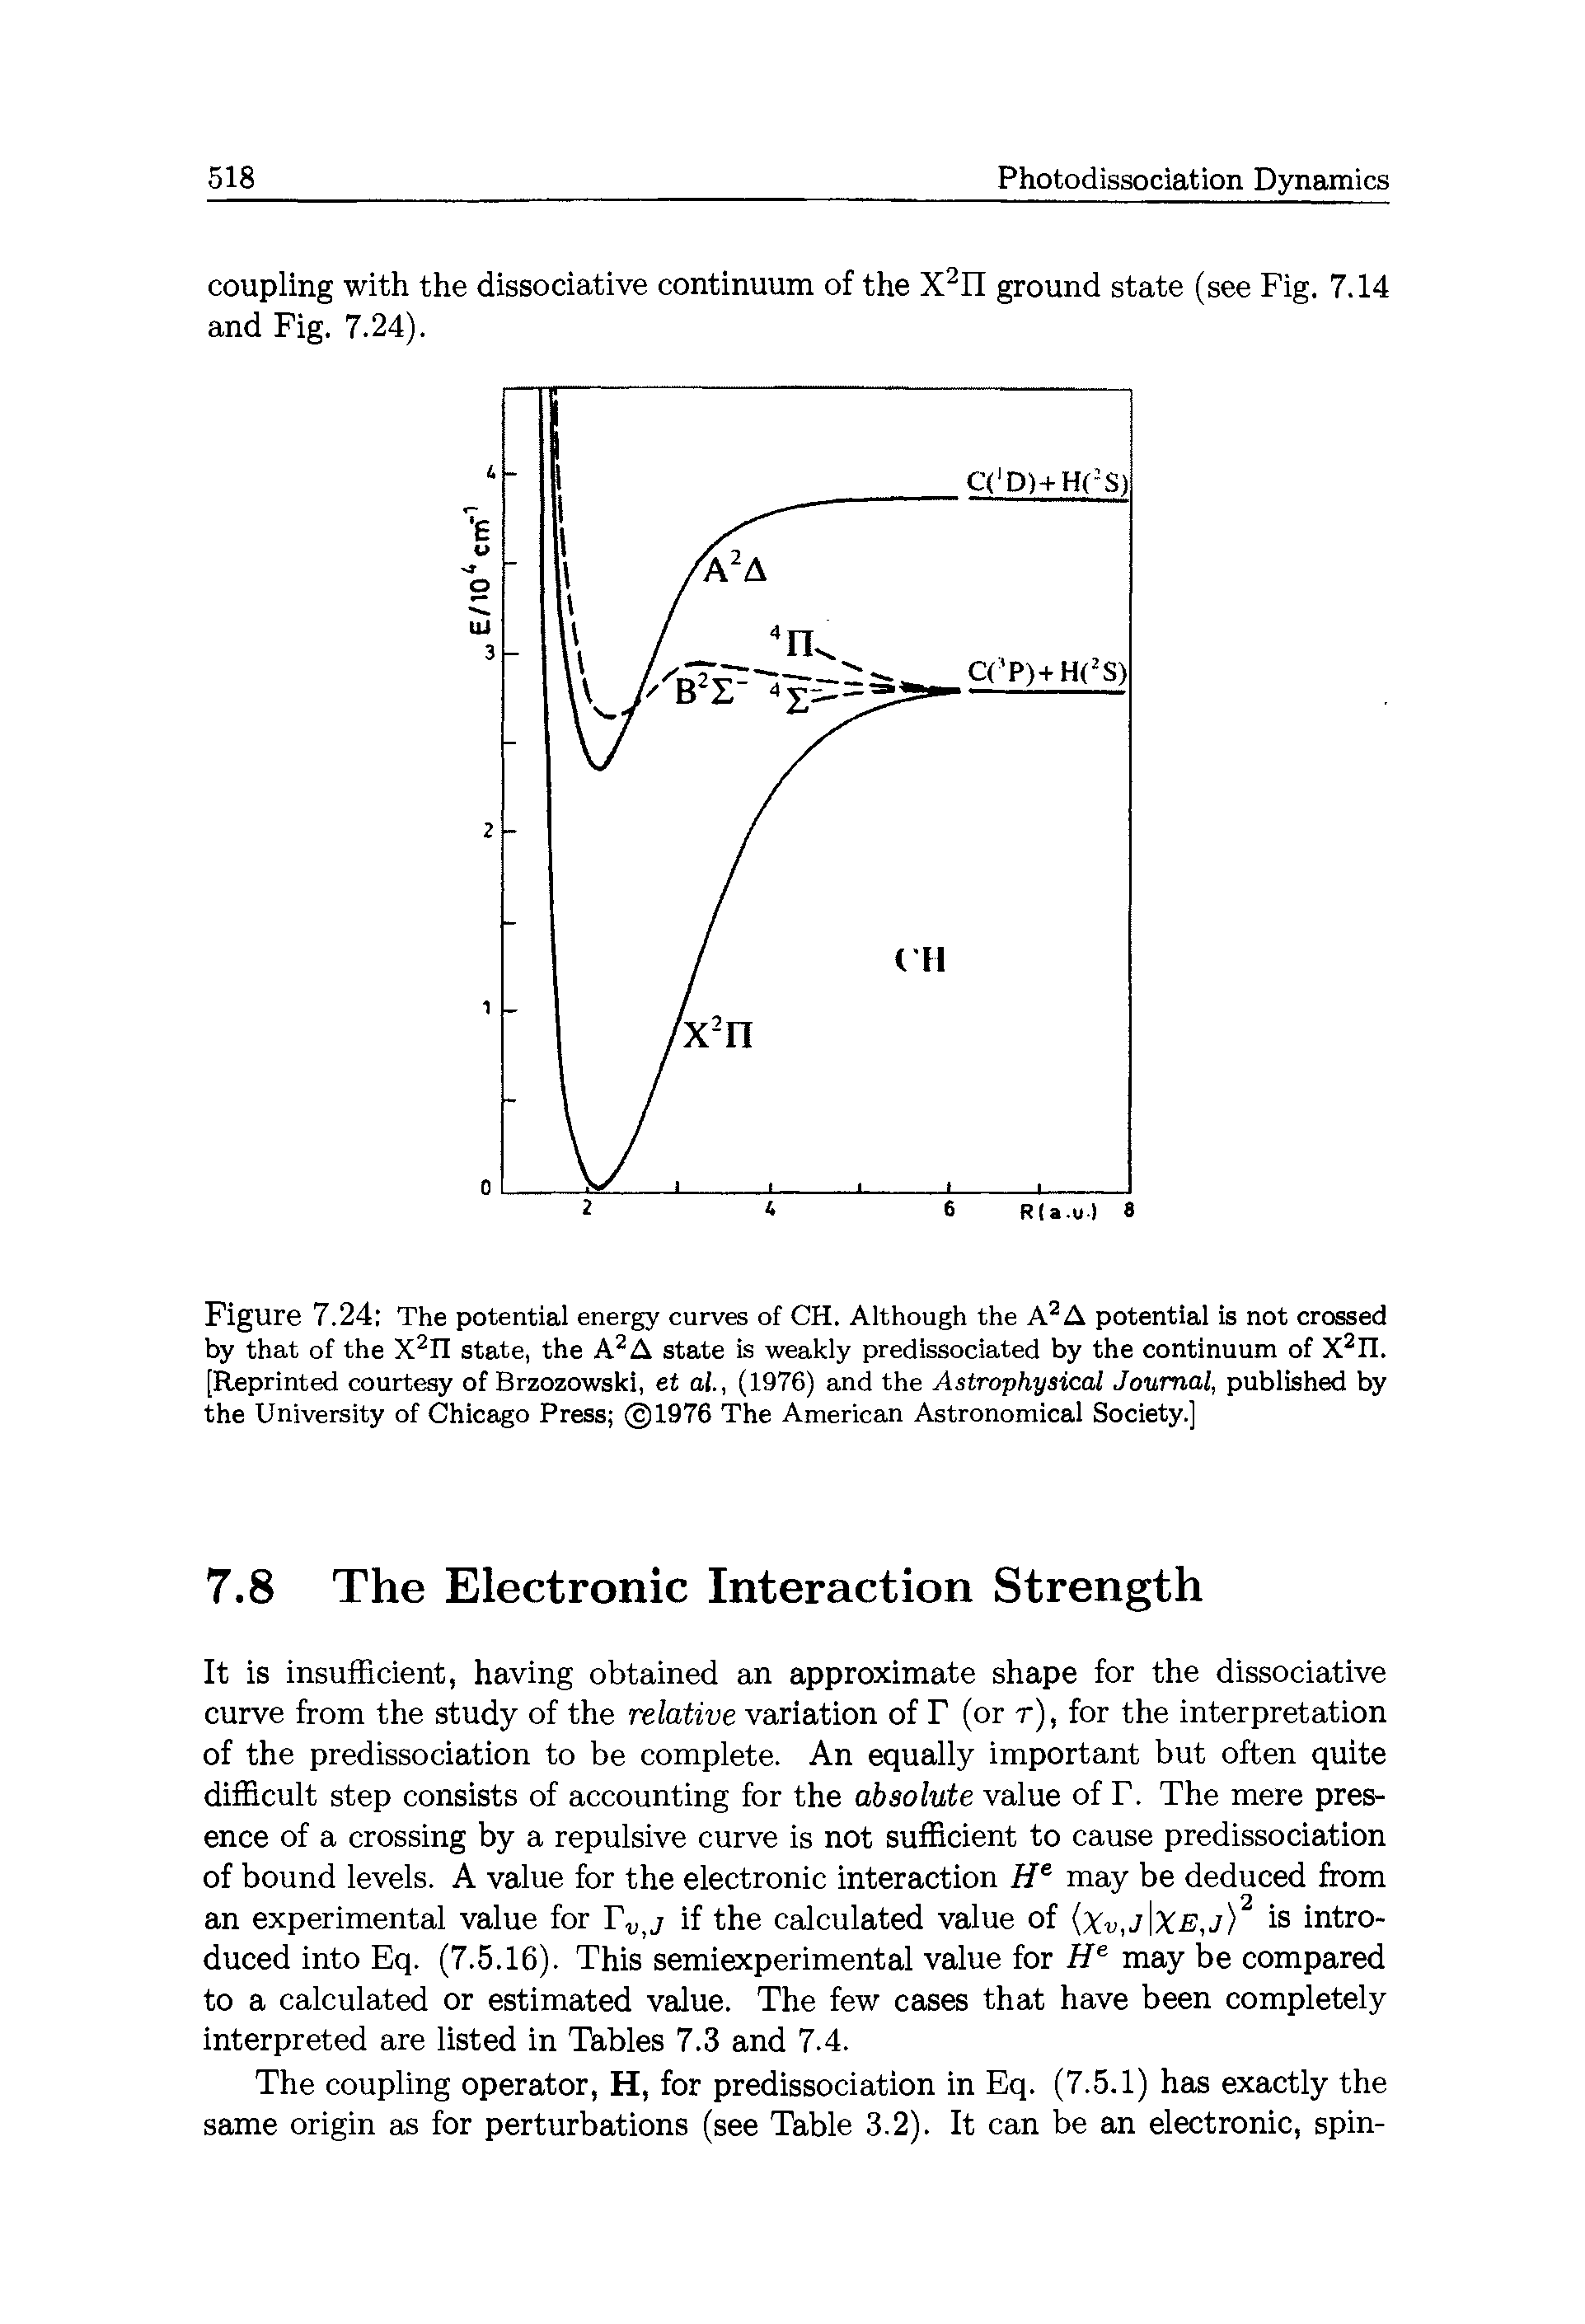 Figure 7.24 The potential energy curves of CH. Although the A2A potential is not crossed by that of the X2n state, the A2A state is weakly predissociated by the continuum of X2n. [Reprinted courtesy of Brzozowski, et al., (1976) and the Astrophysical Journal, published by the University of Chicago Press 1976 The American Astronomical Society.]...